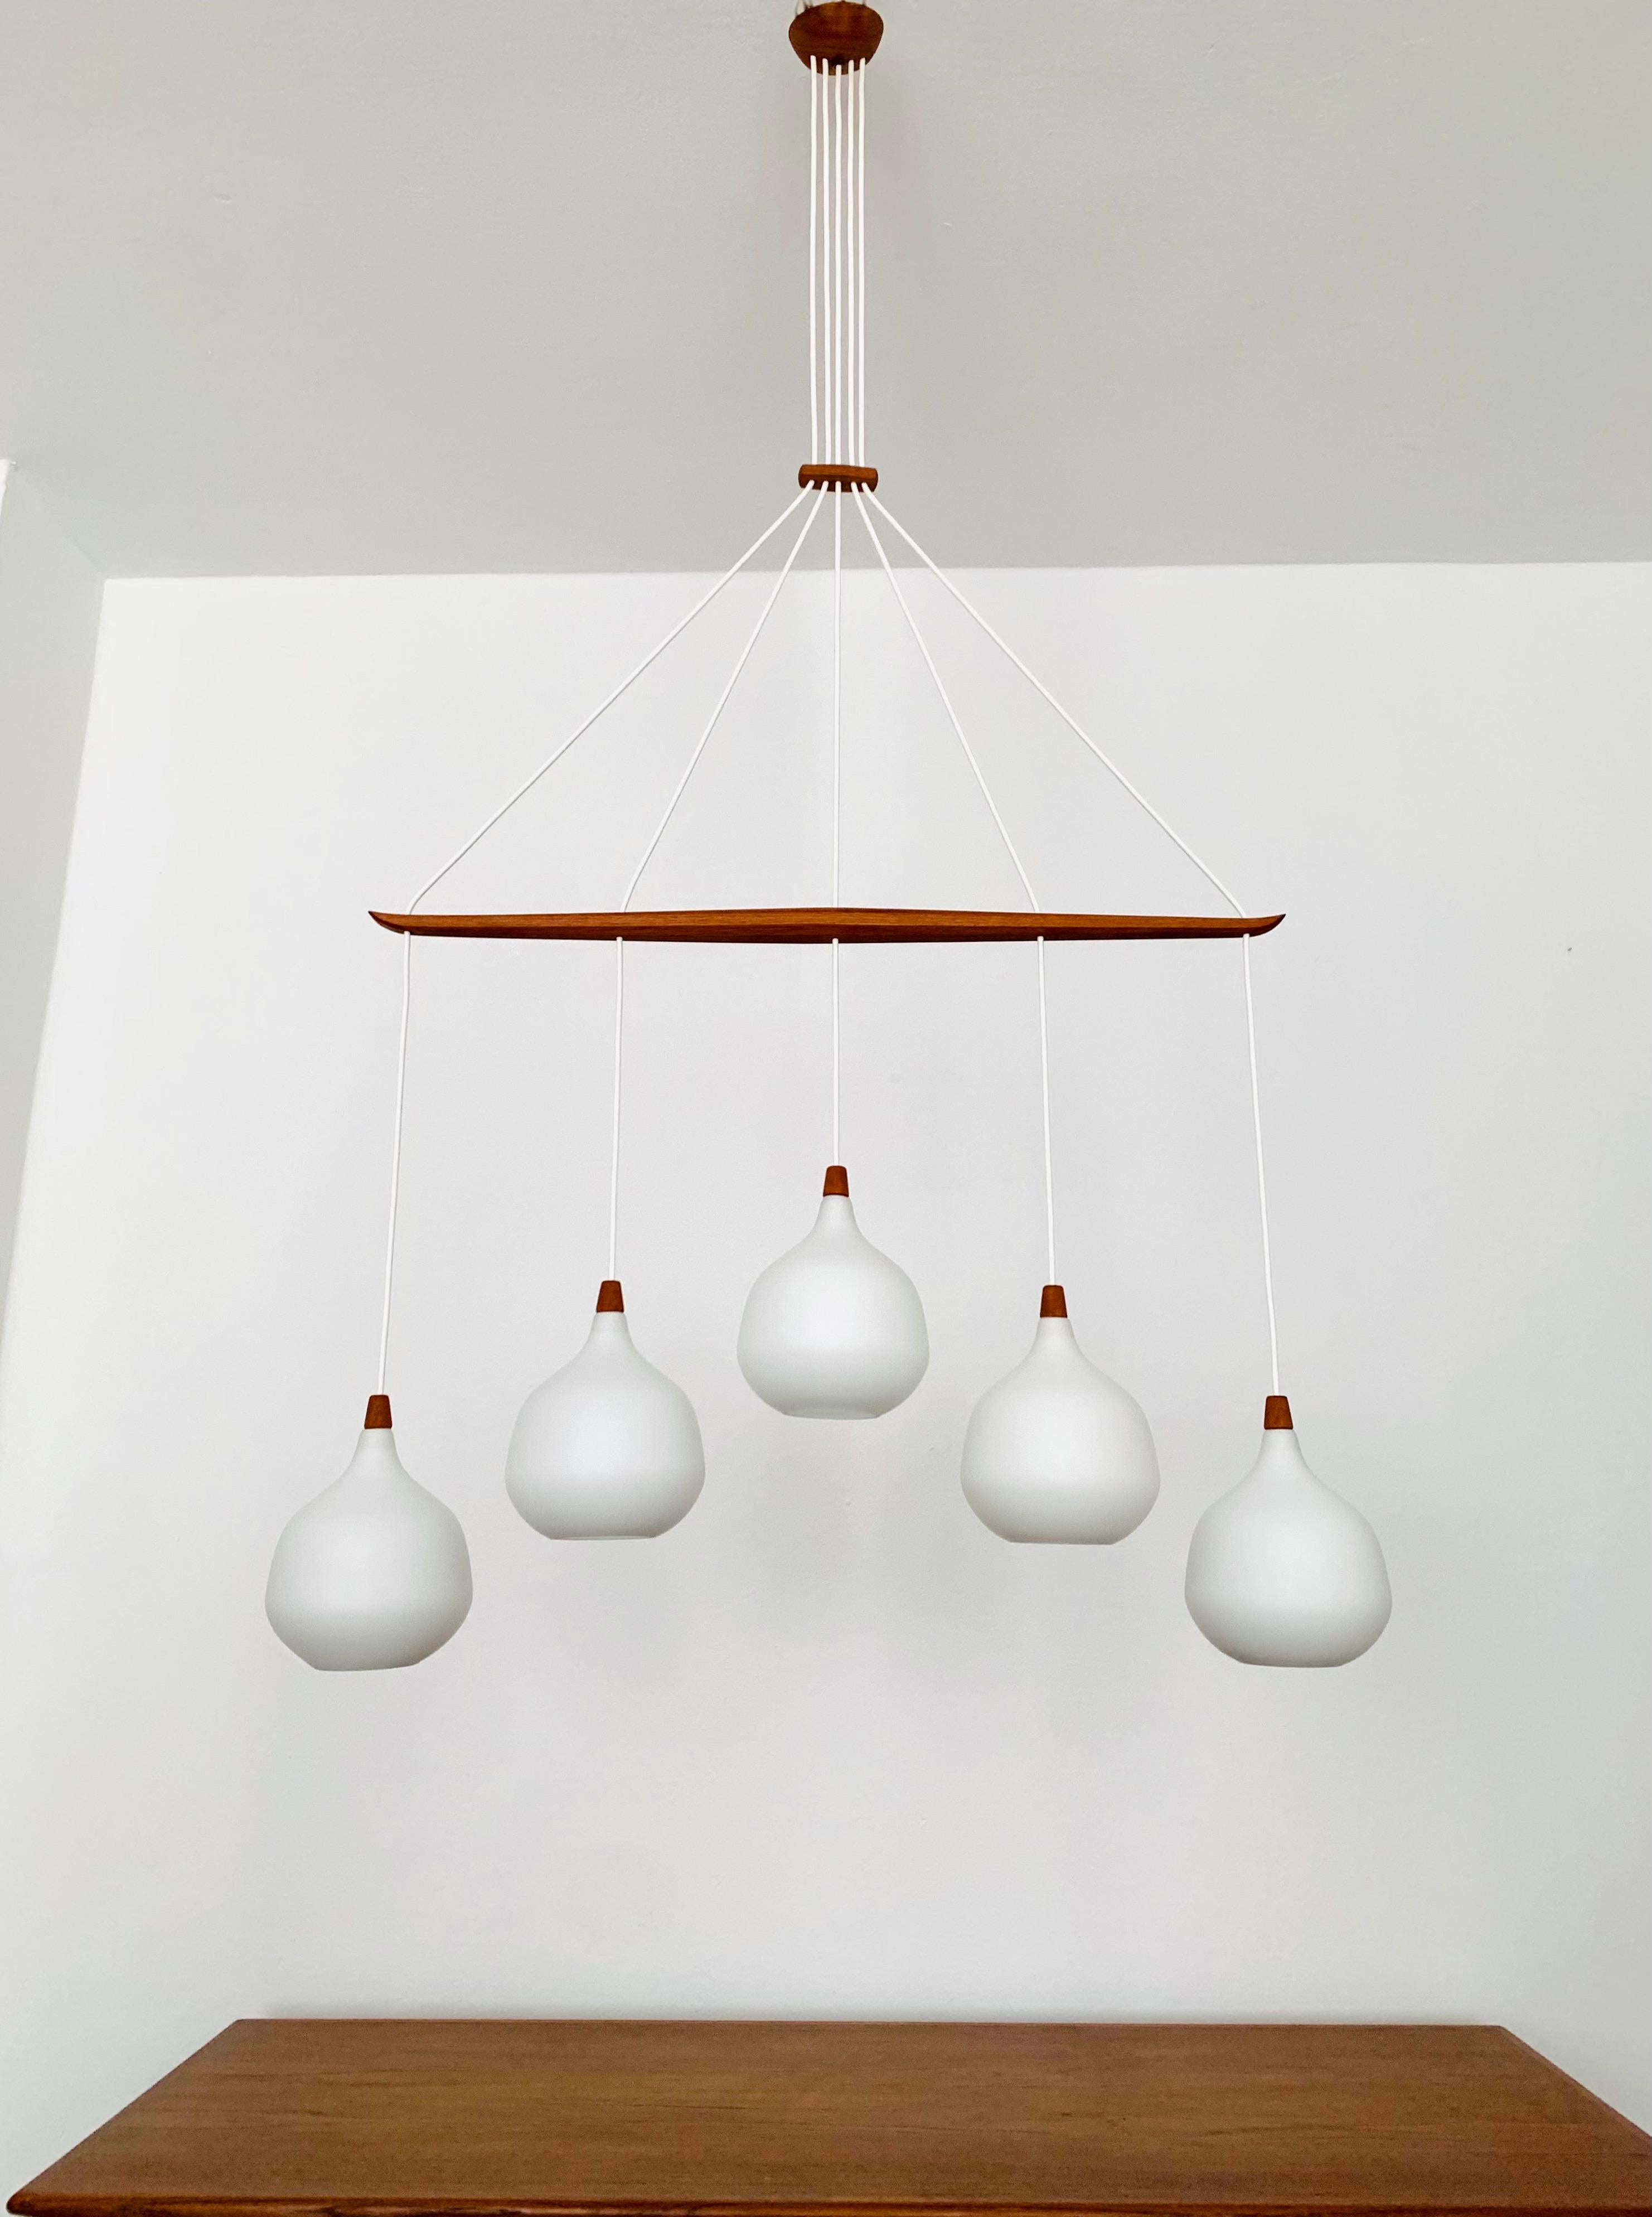 Wonderful Swedish opal glass chandelier from the 1960s.
Great and exceptionally minimalistic design with a fantastically elegant look.
Very nice teak details.
Very rare version in this design.

Manufacturer: Luxus
Design: Uno and Östen